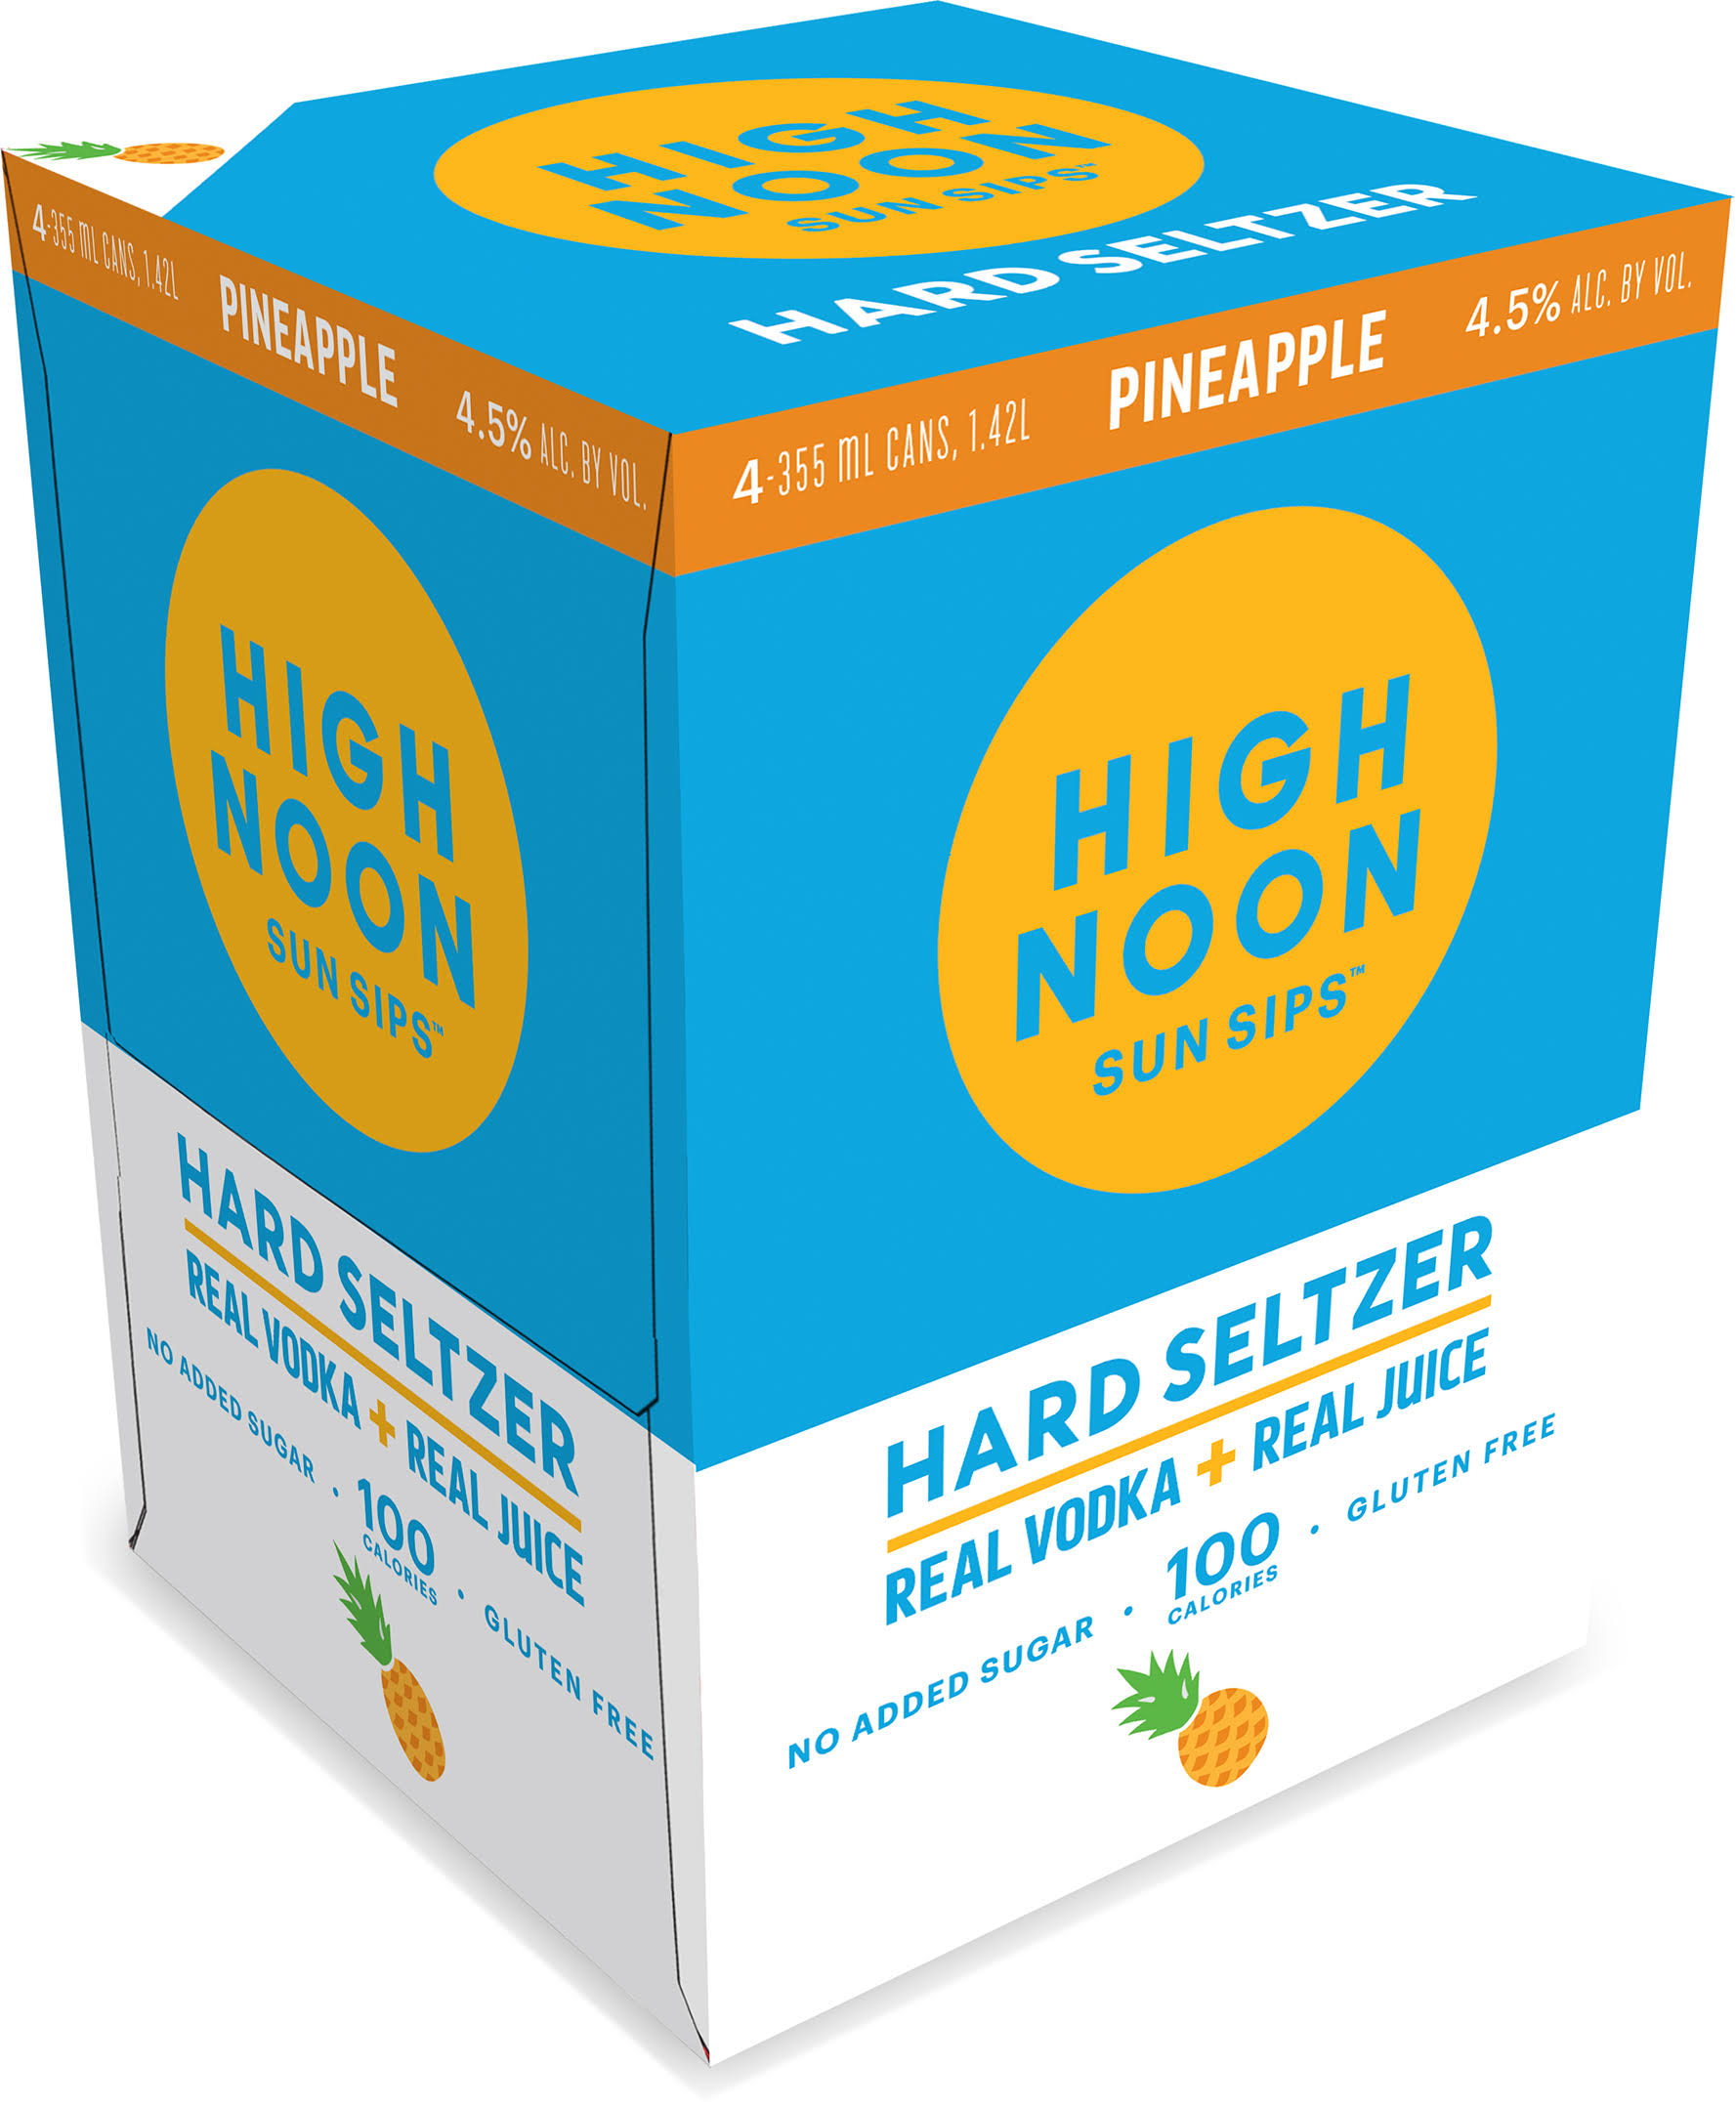 High Noon Sun Sips Vodka & Soda, Pineapple - 4 pack, 355 ml cans